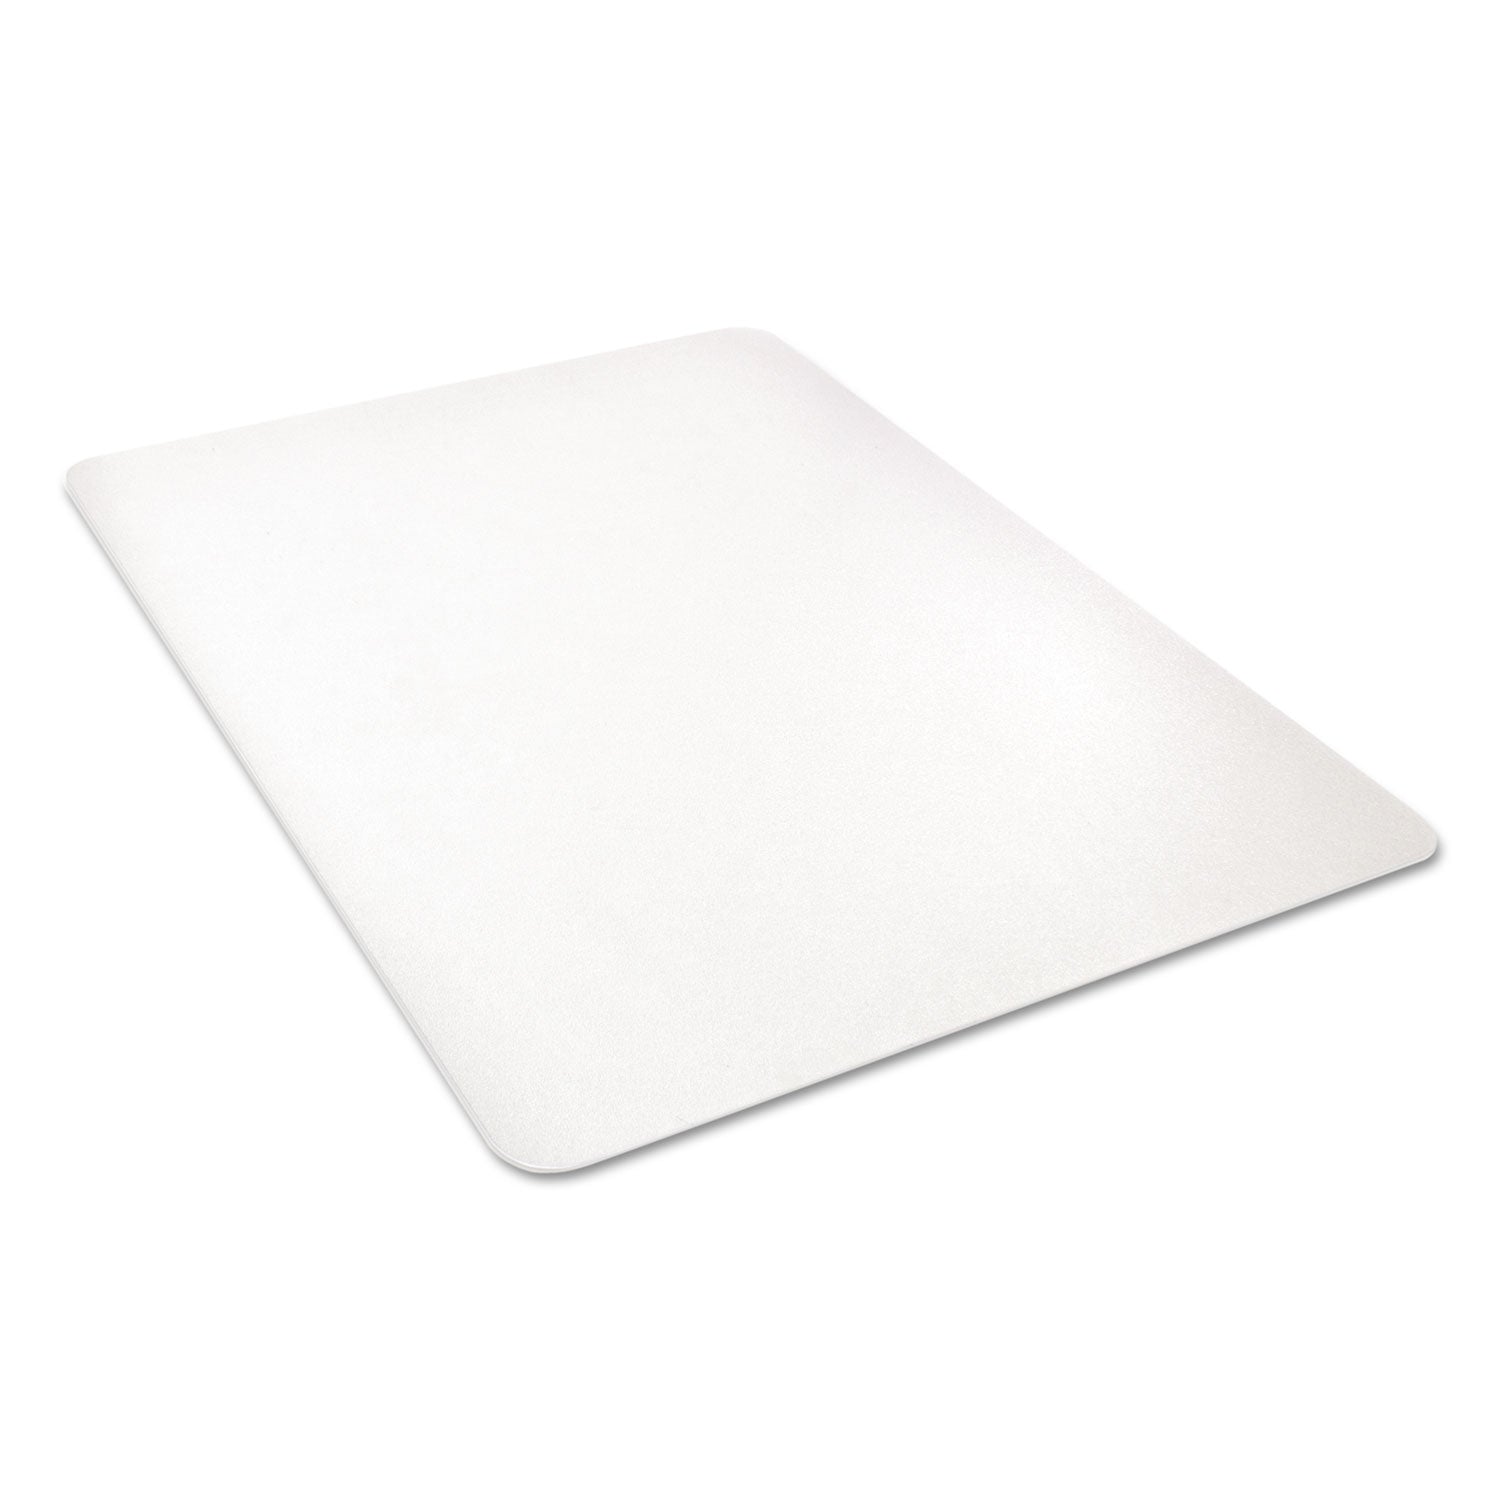 All Day Use Chair Mat - Hard Floors, 46 x 60, Rectangle, Clear - 